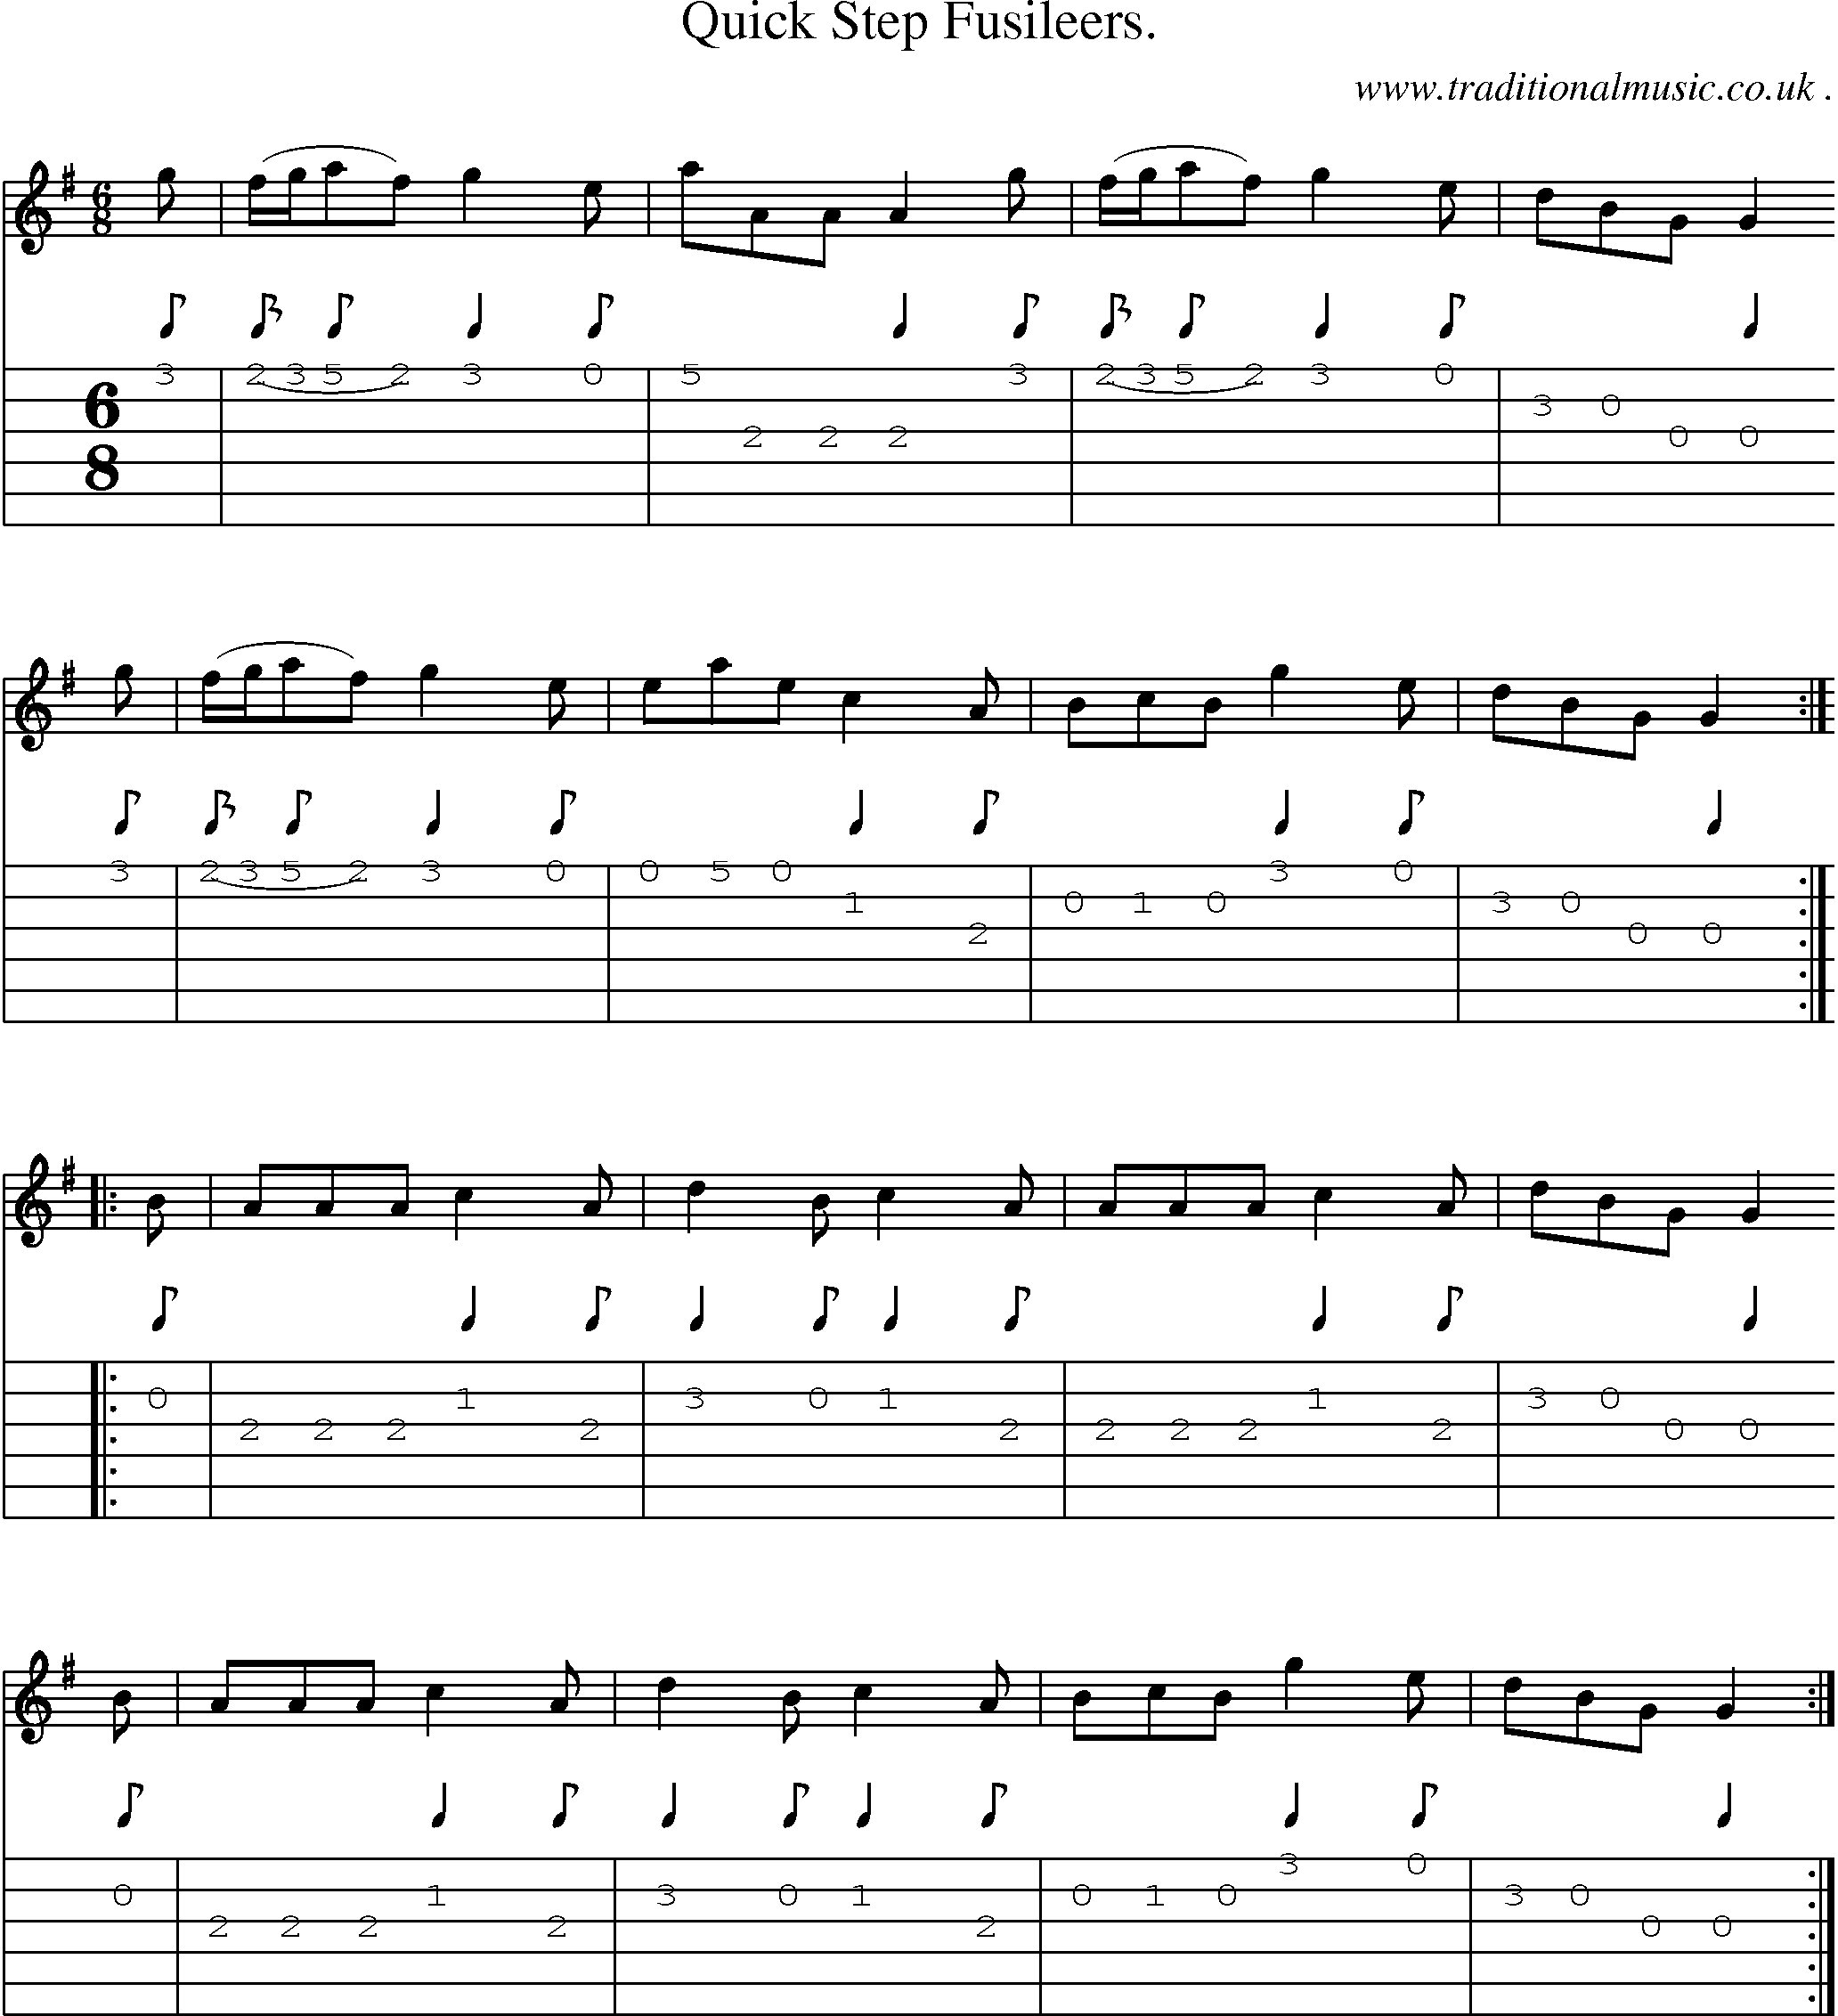 Sheet-Music and Guitar Tabs for Quick Step Fusileers